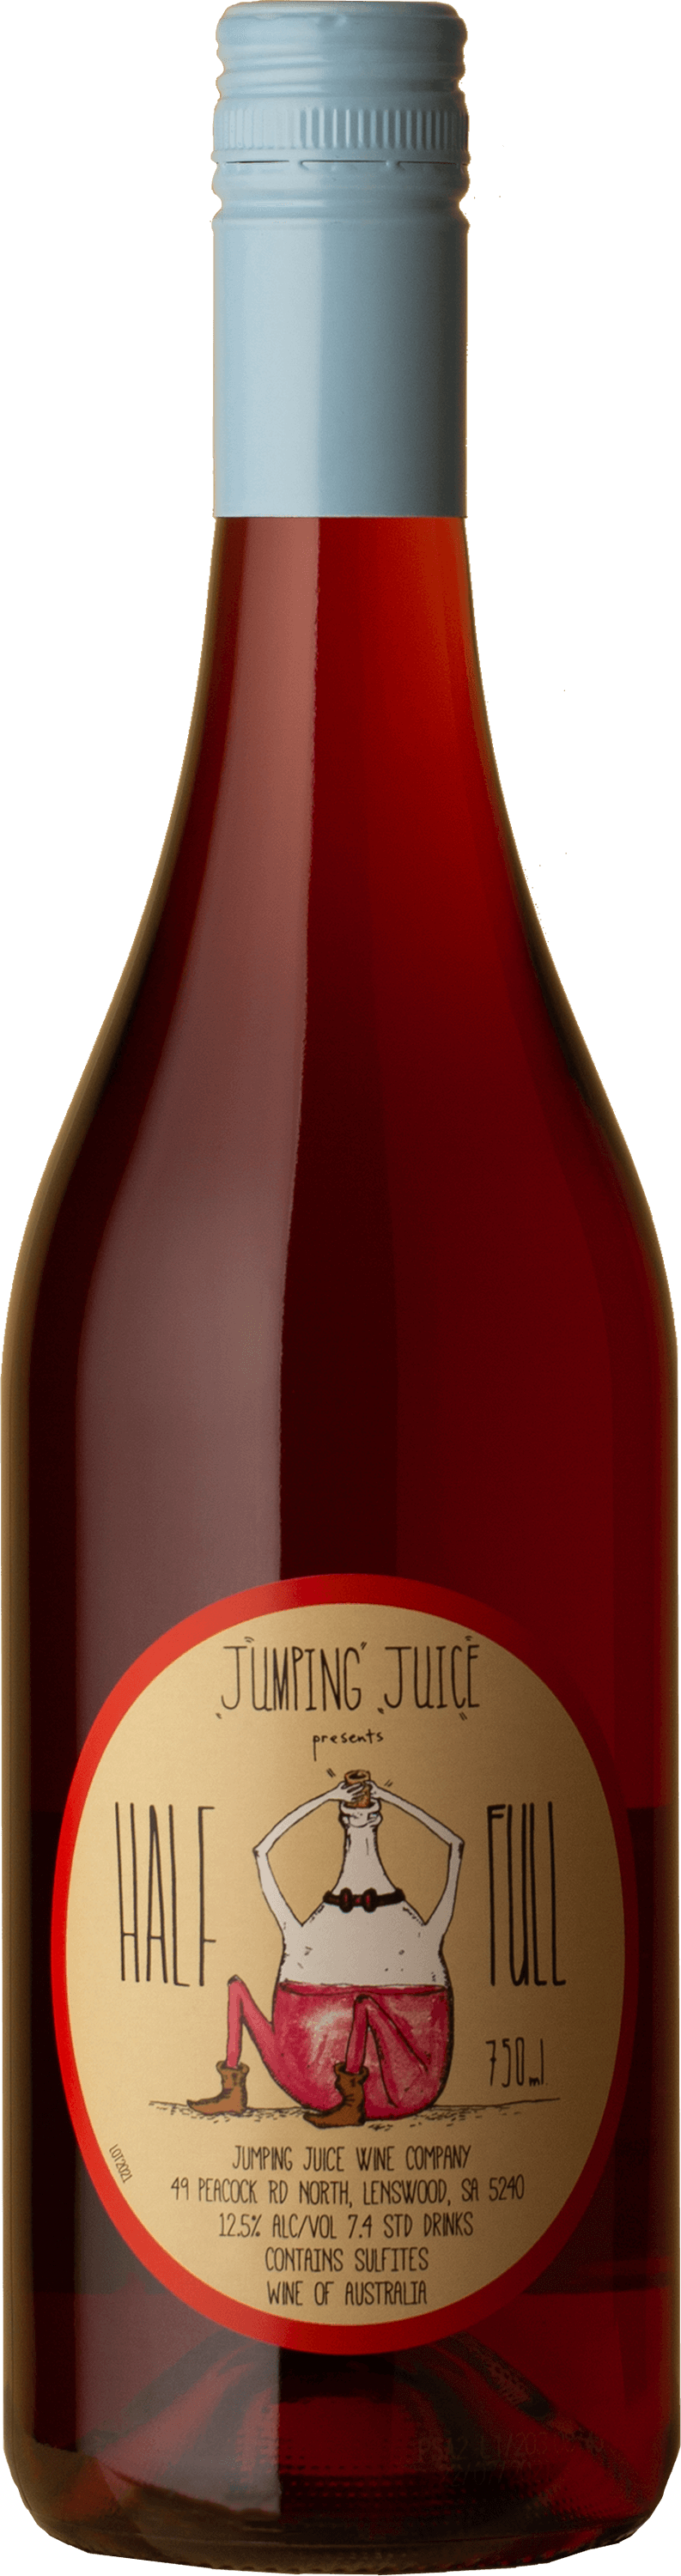 Jumping Juice - Half Full Red 2021 Red Wine